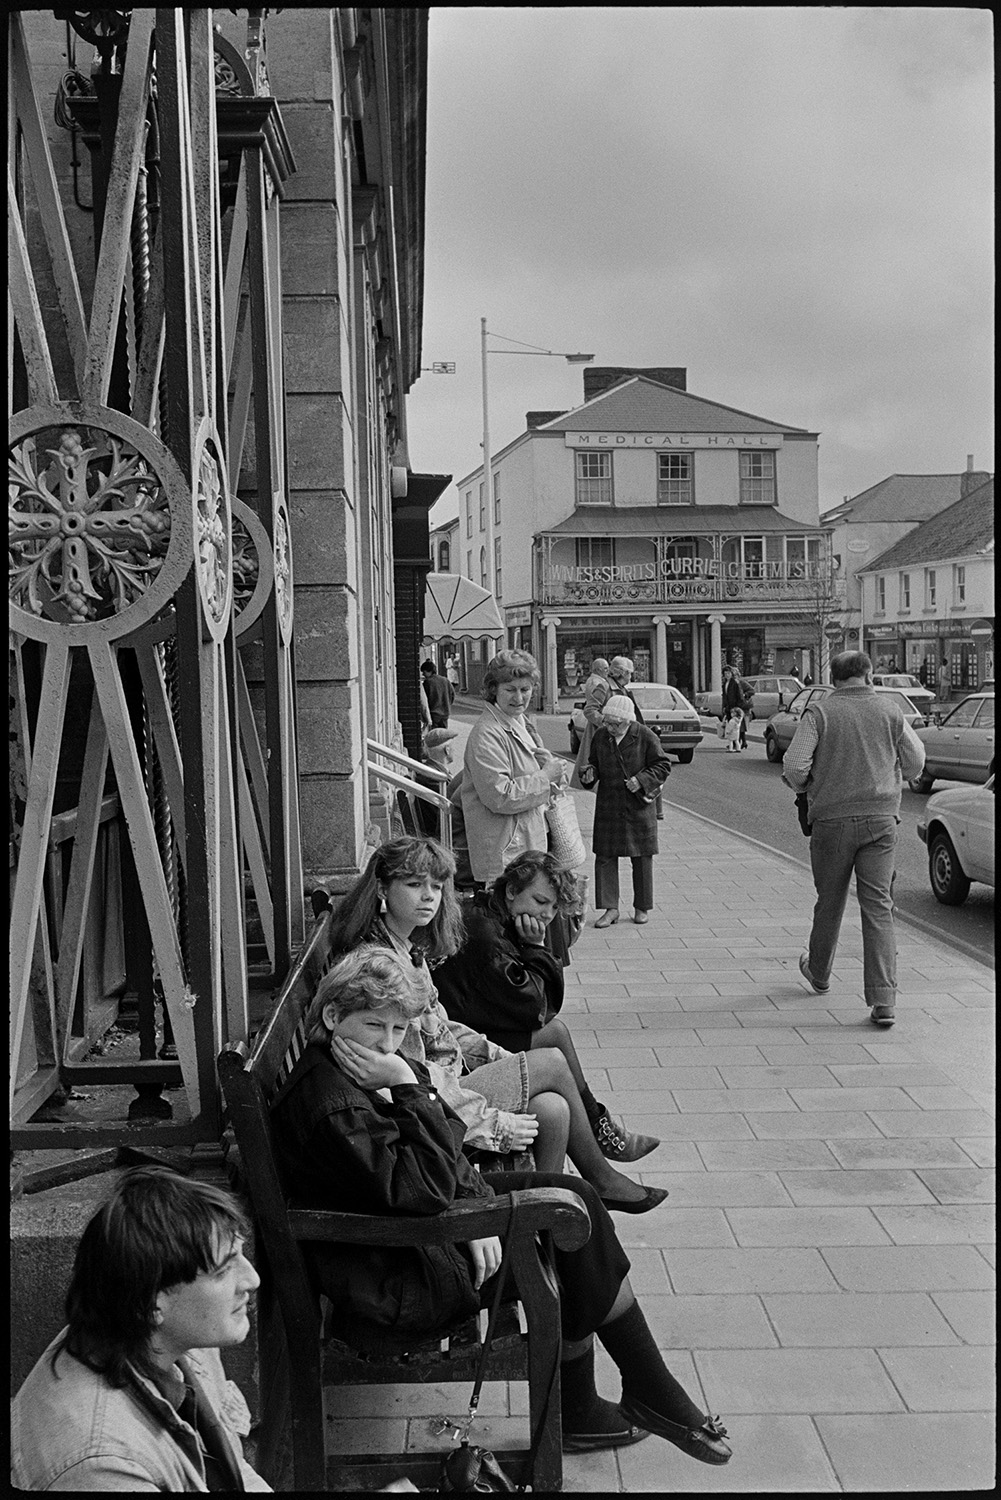 Street scene with people sitting on benches by the wrought iron church gates in South Molton. Currie's chemist shop can be seen in the background beyond cars and passers-by.